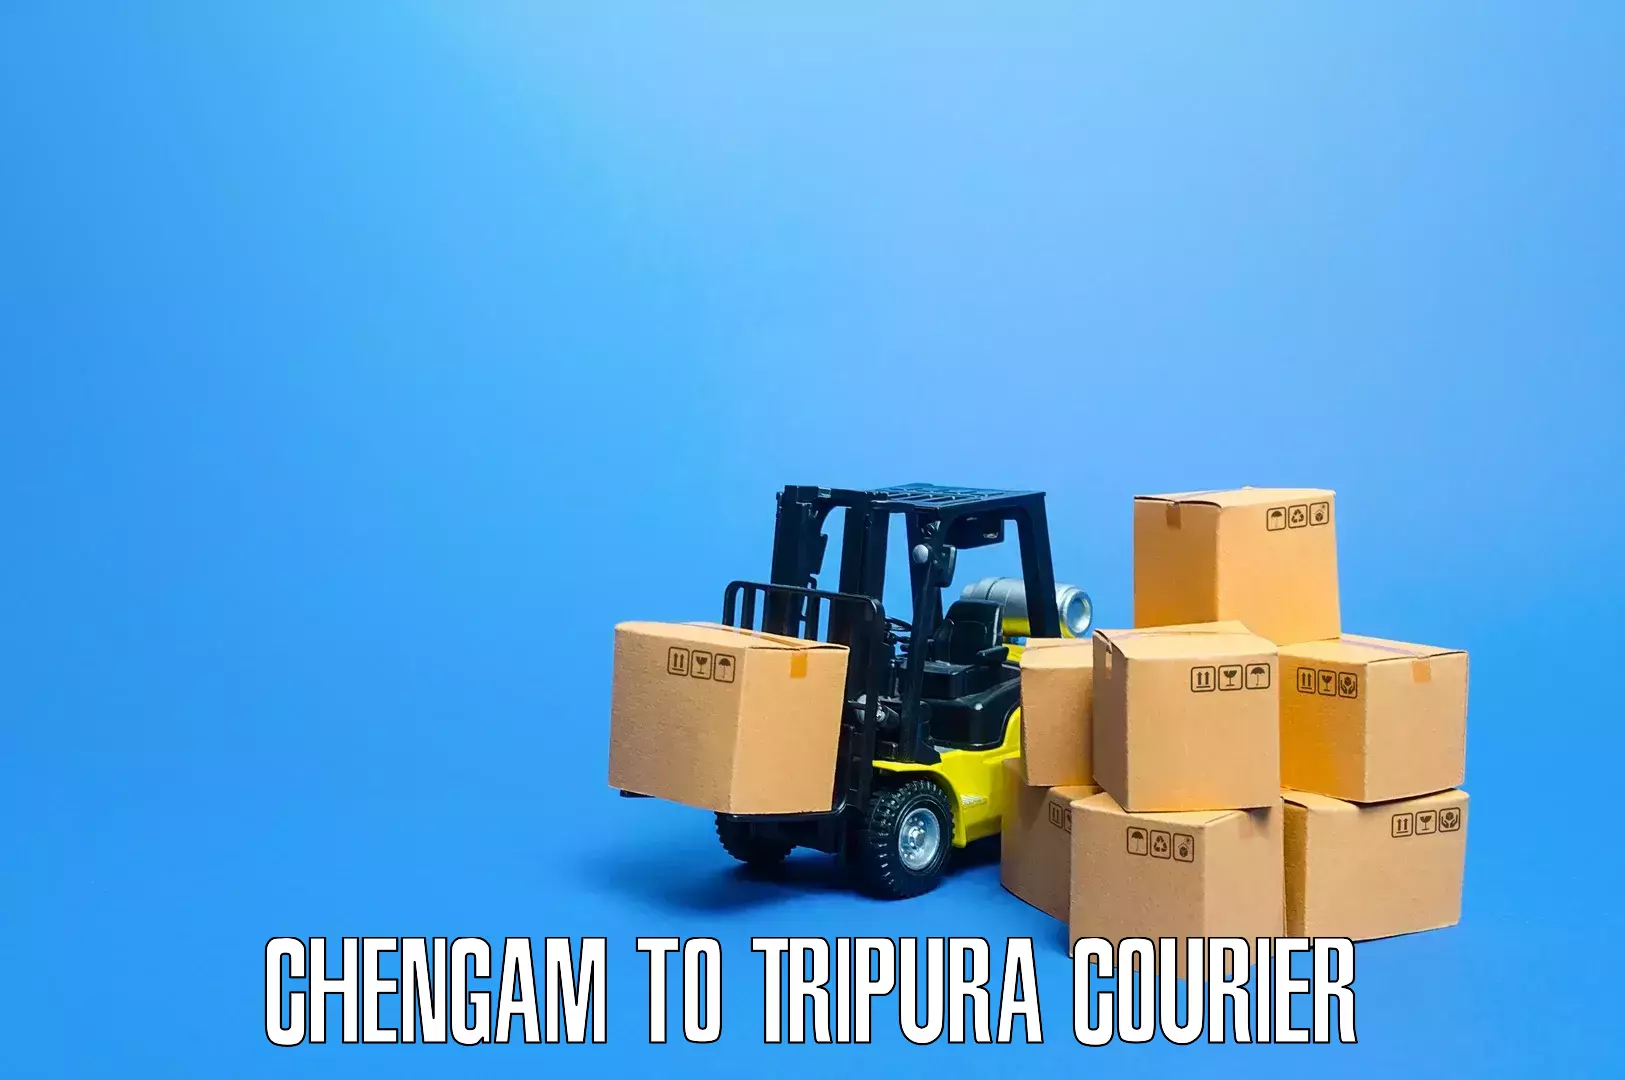 Reliable furniture movers Chengam to North Tripura